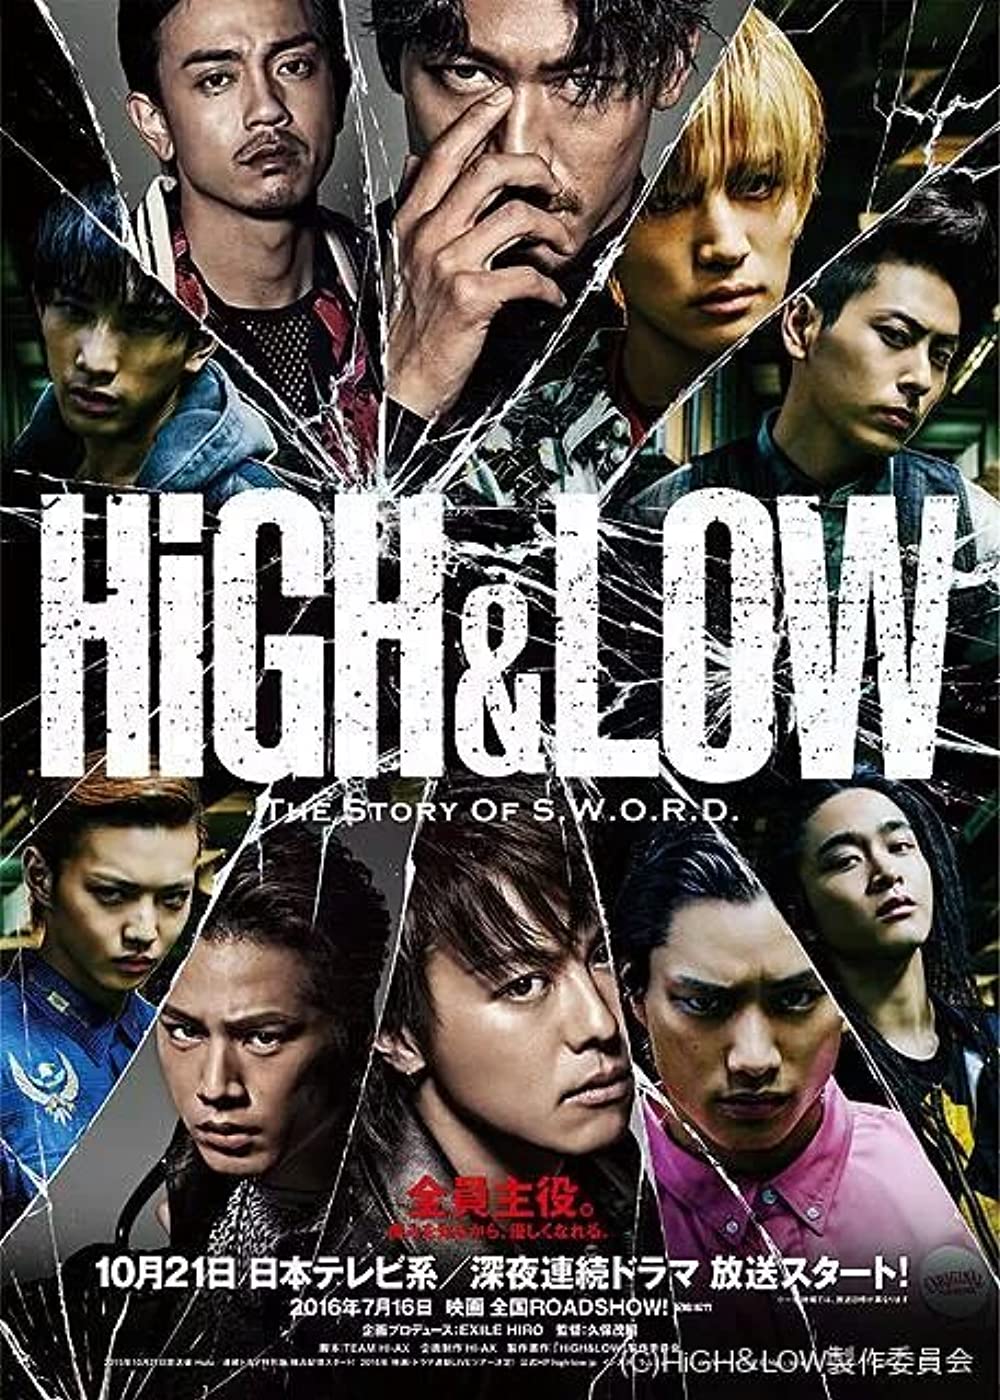 High & Low: The Story of S.W.O.R.D. Episode .1 (TV Episode 2015)